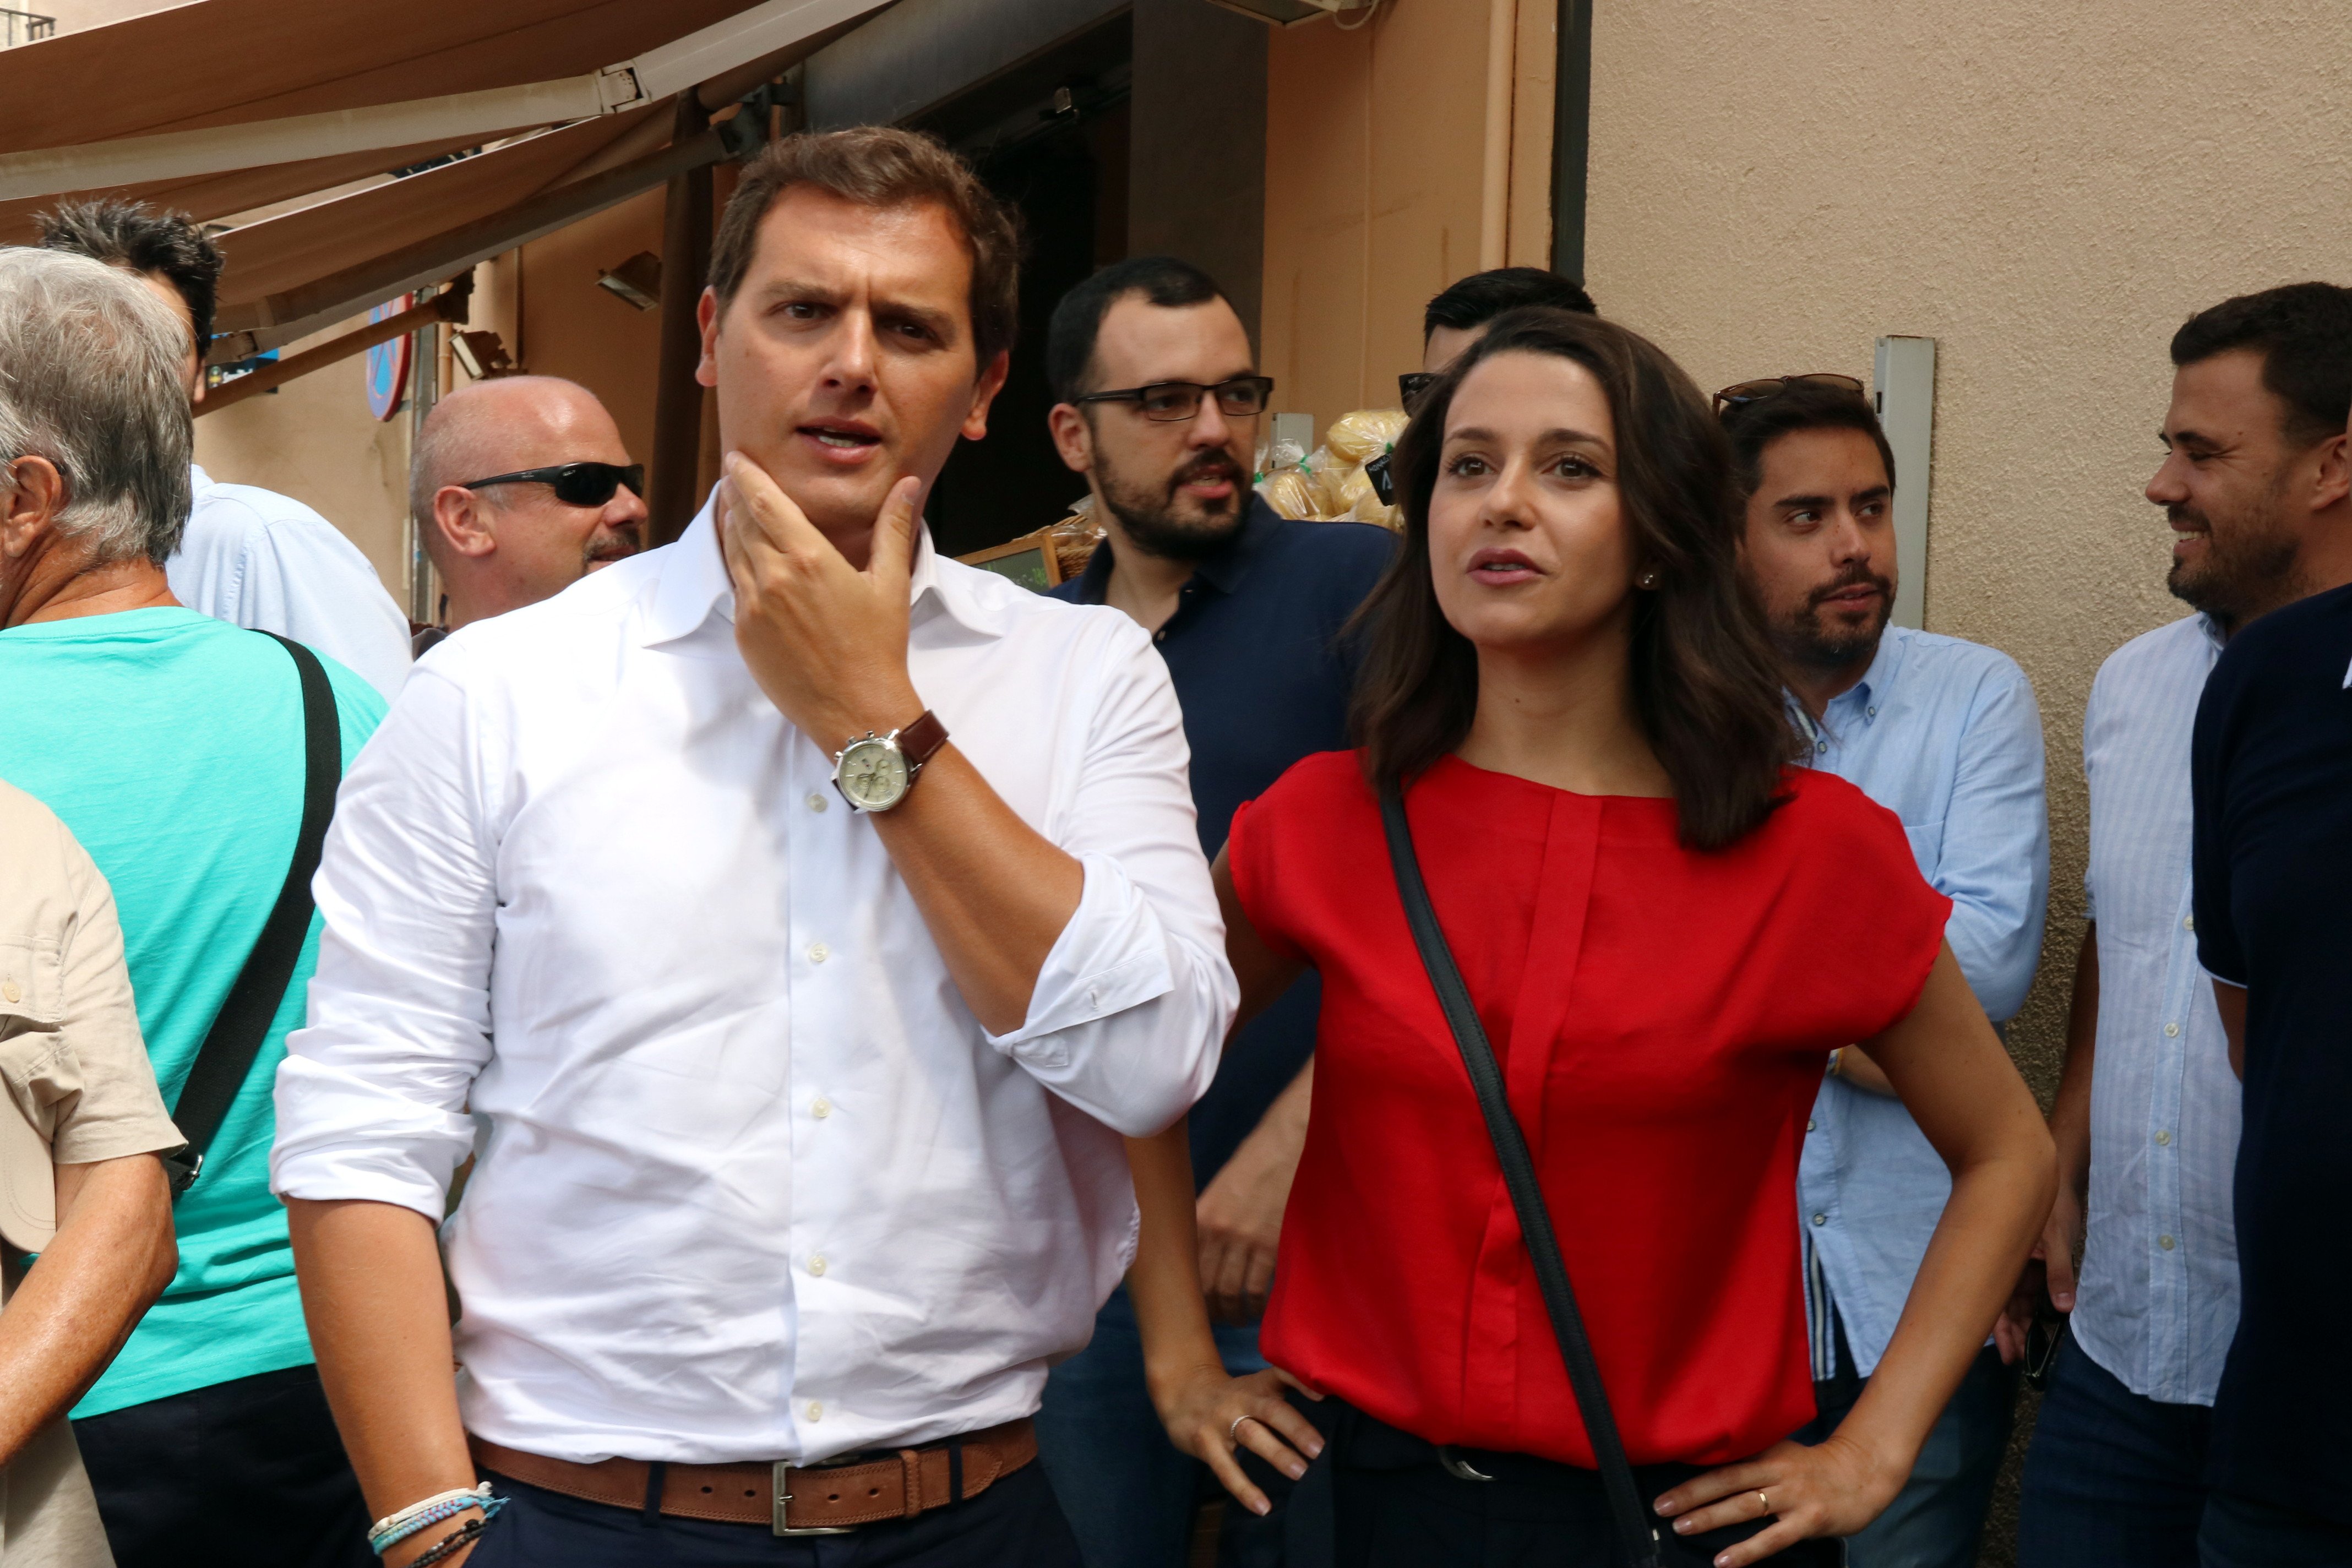 Most Catalans see Ciudadanos as an extreme right party, says CIS poll